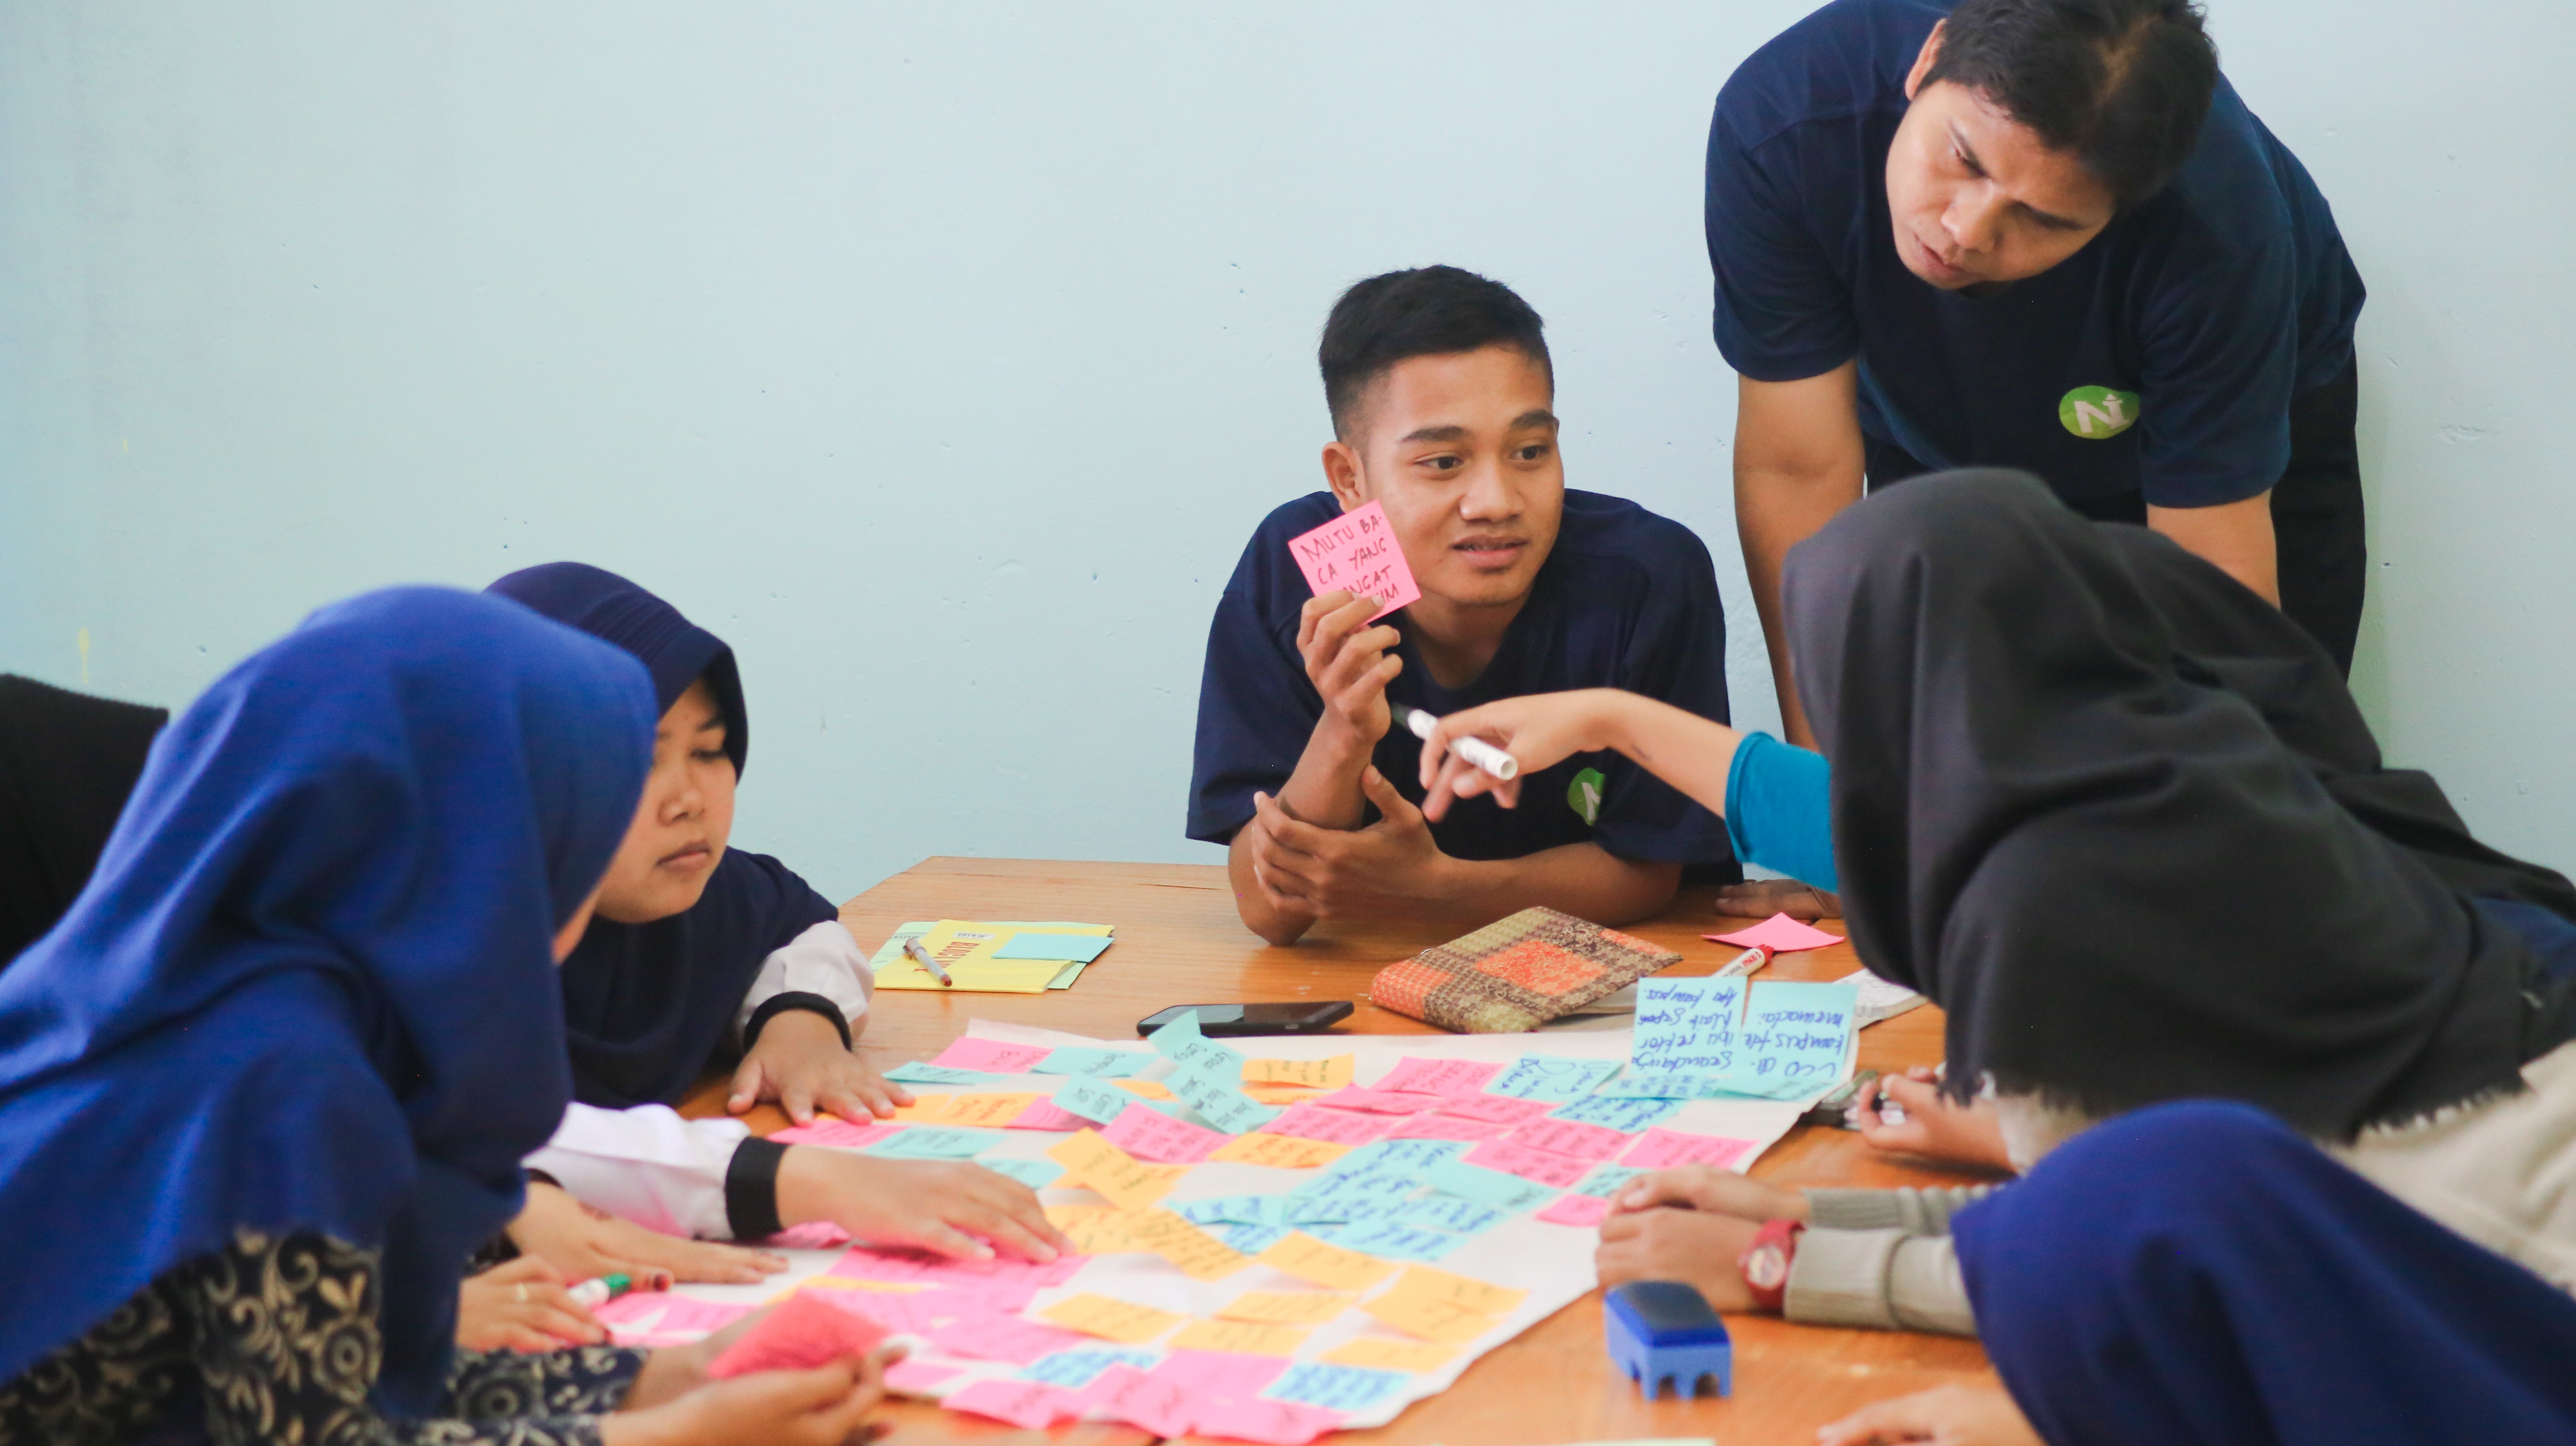 Seven people sit around a table looking and holding up colorful post-it notes. Several women wear a headscarf, two blue and two black.